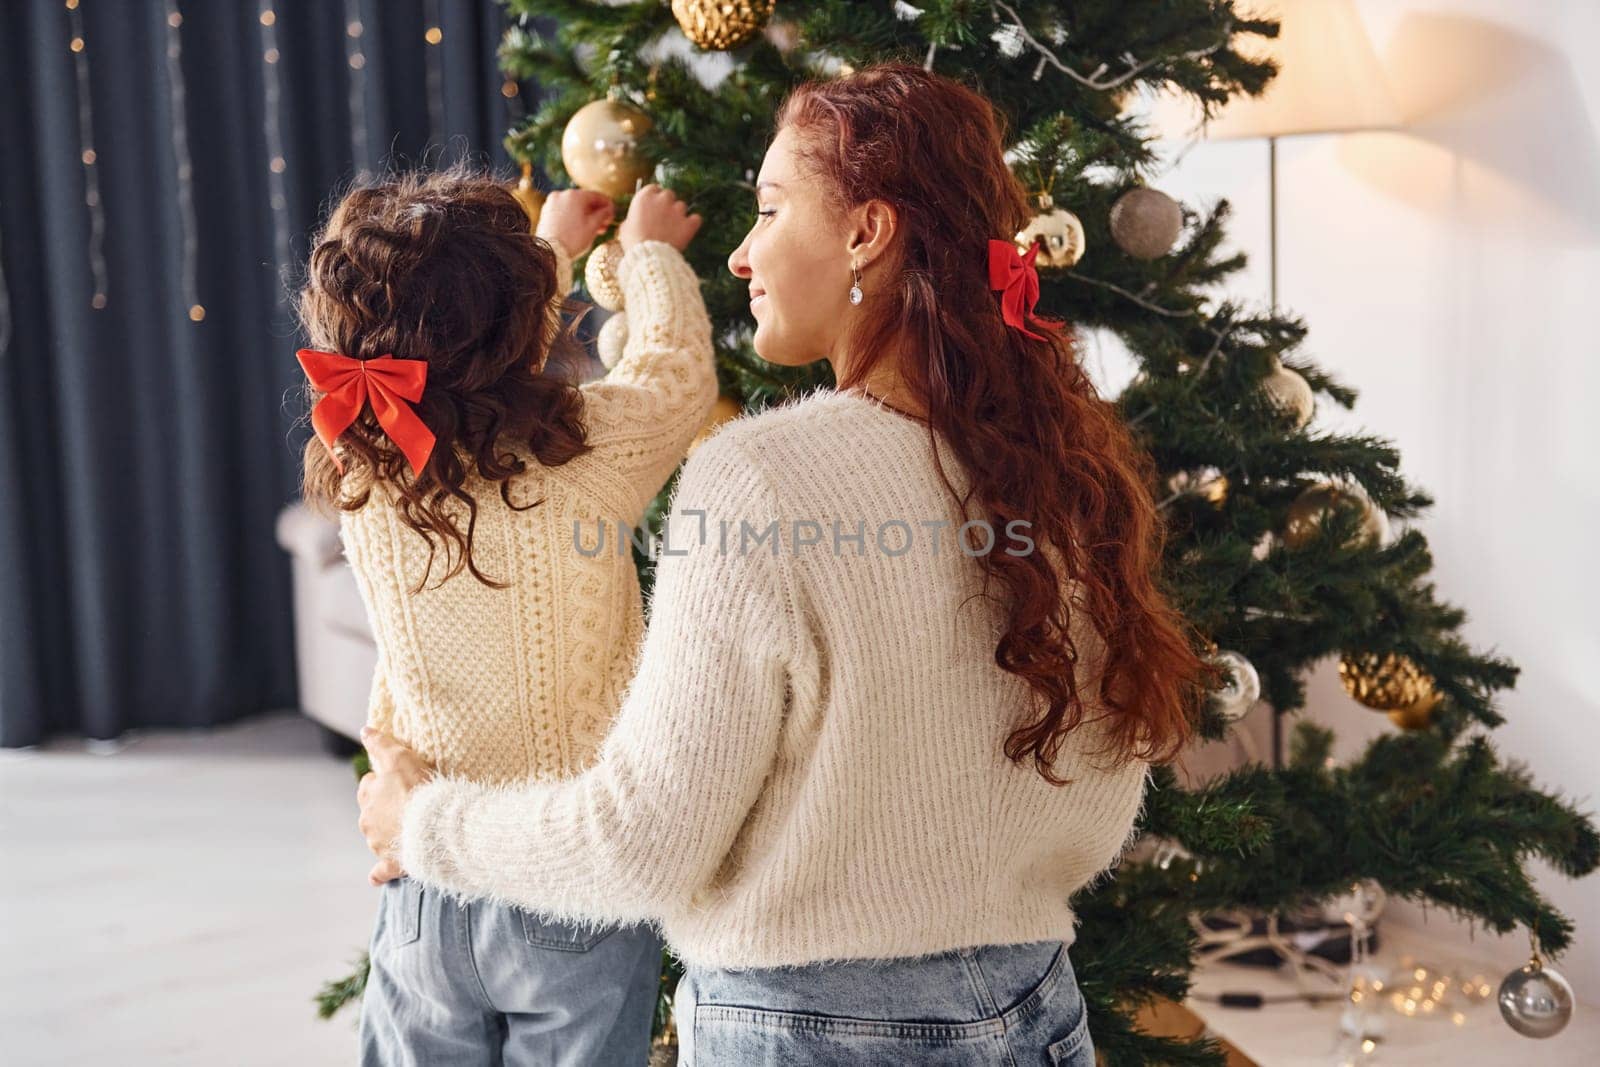 Decorating tree. Mother with her little daughter is at home.